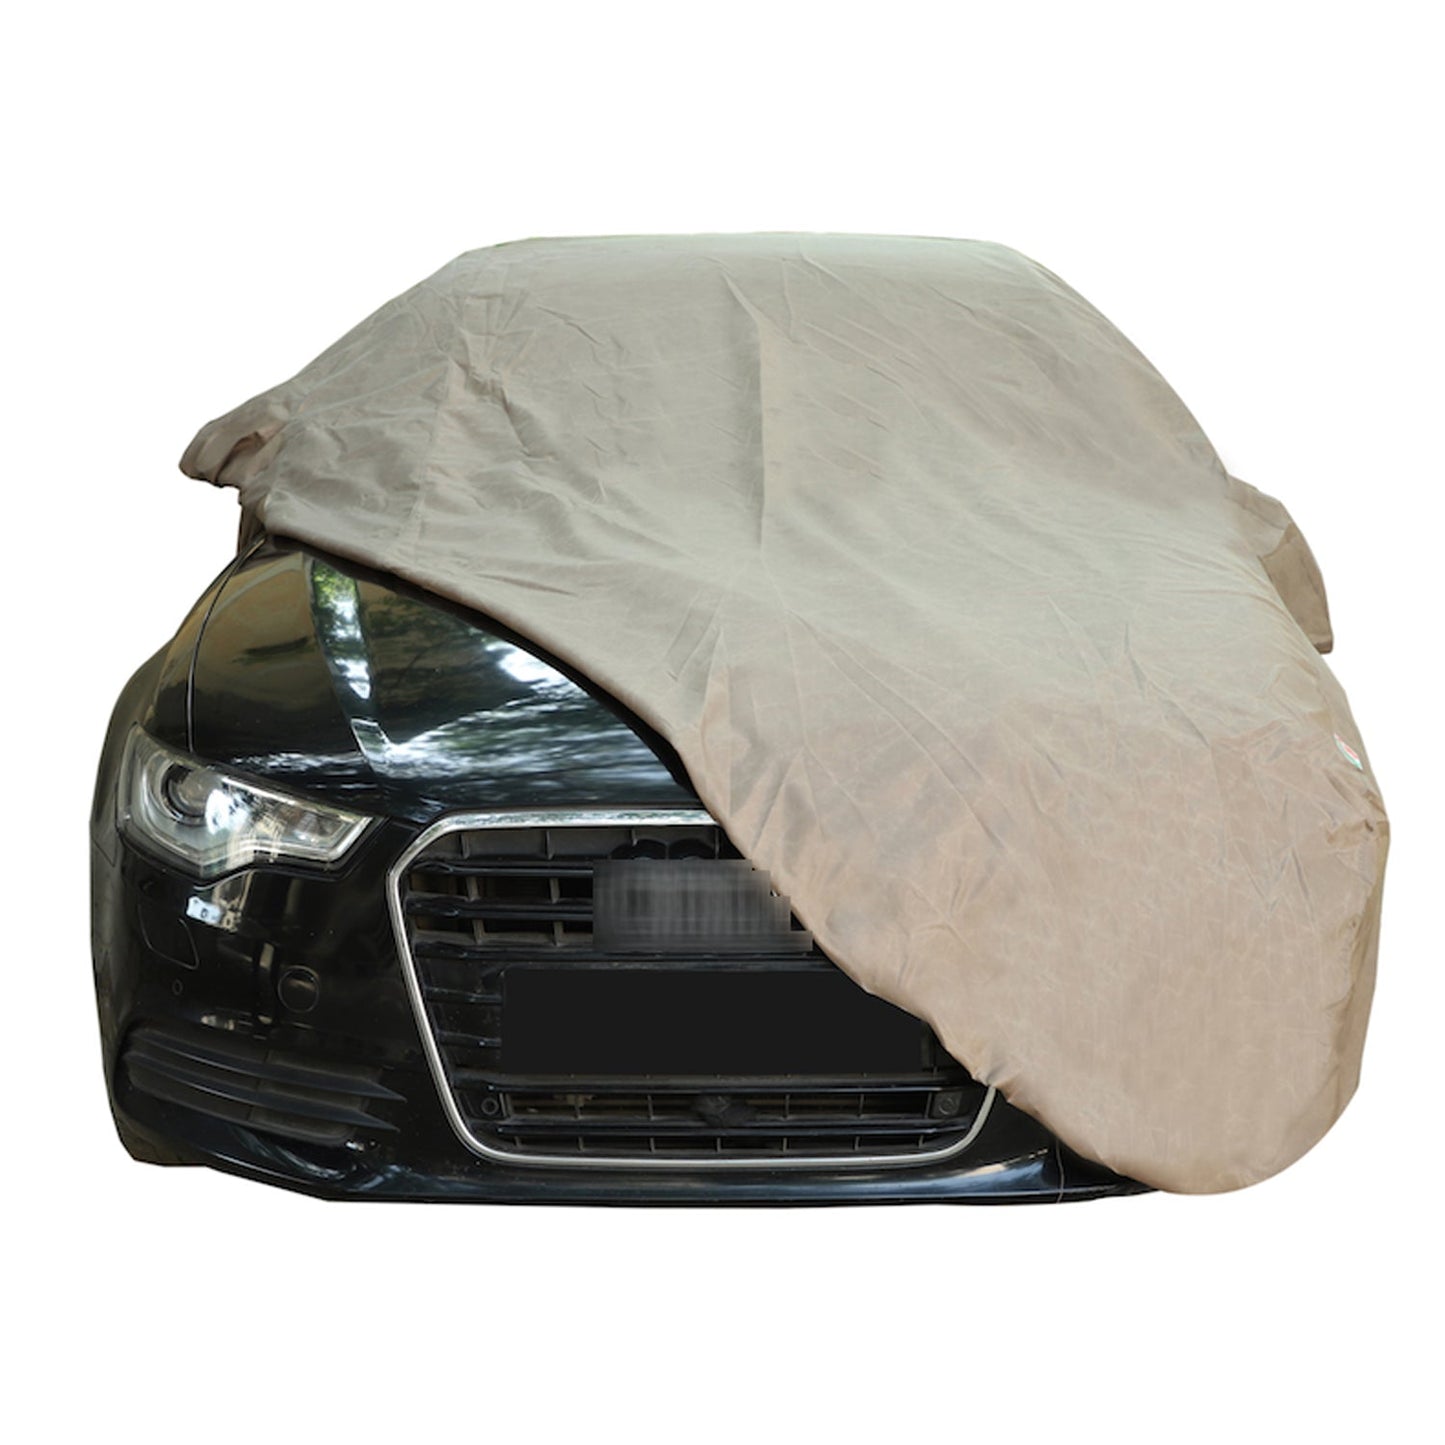 Oshotto Brown 100% Waterproof Car Body Cover with Mirror Pockets For Hyundai Santa Fe